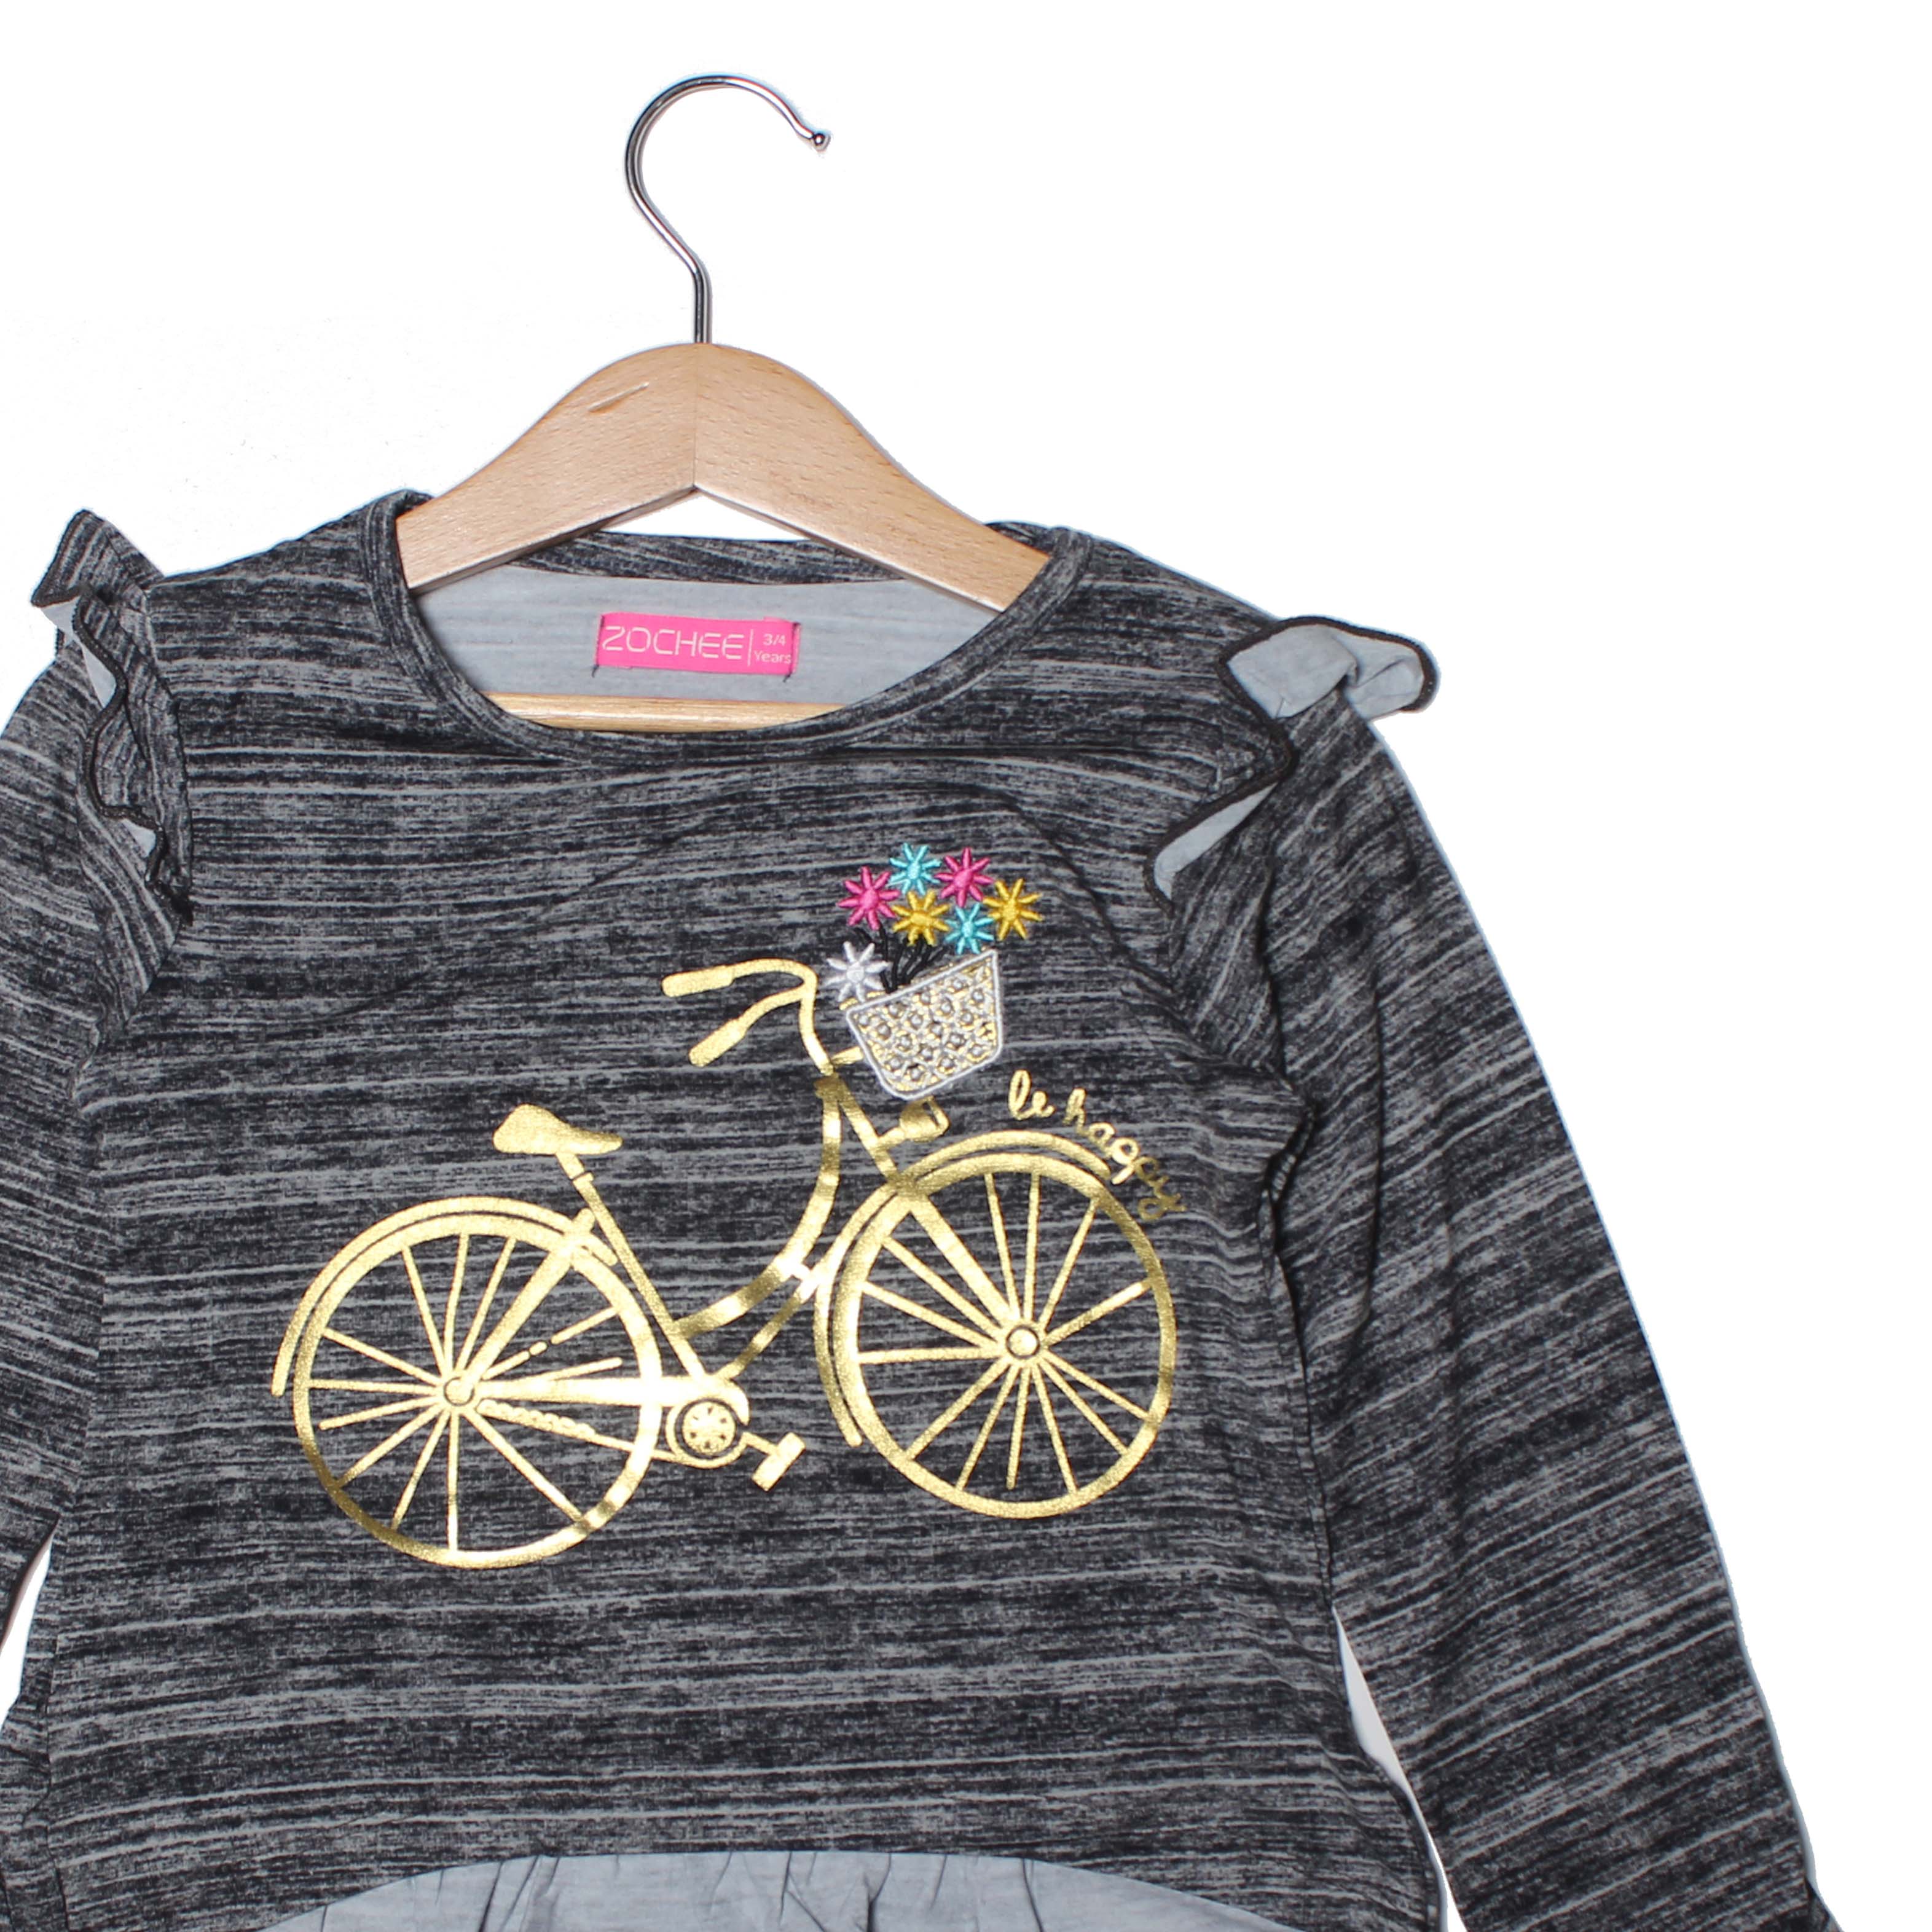 NEW CHARCOAL GREY CYCLE PRINTED T-SHIRT TOP FOR GIRLS